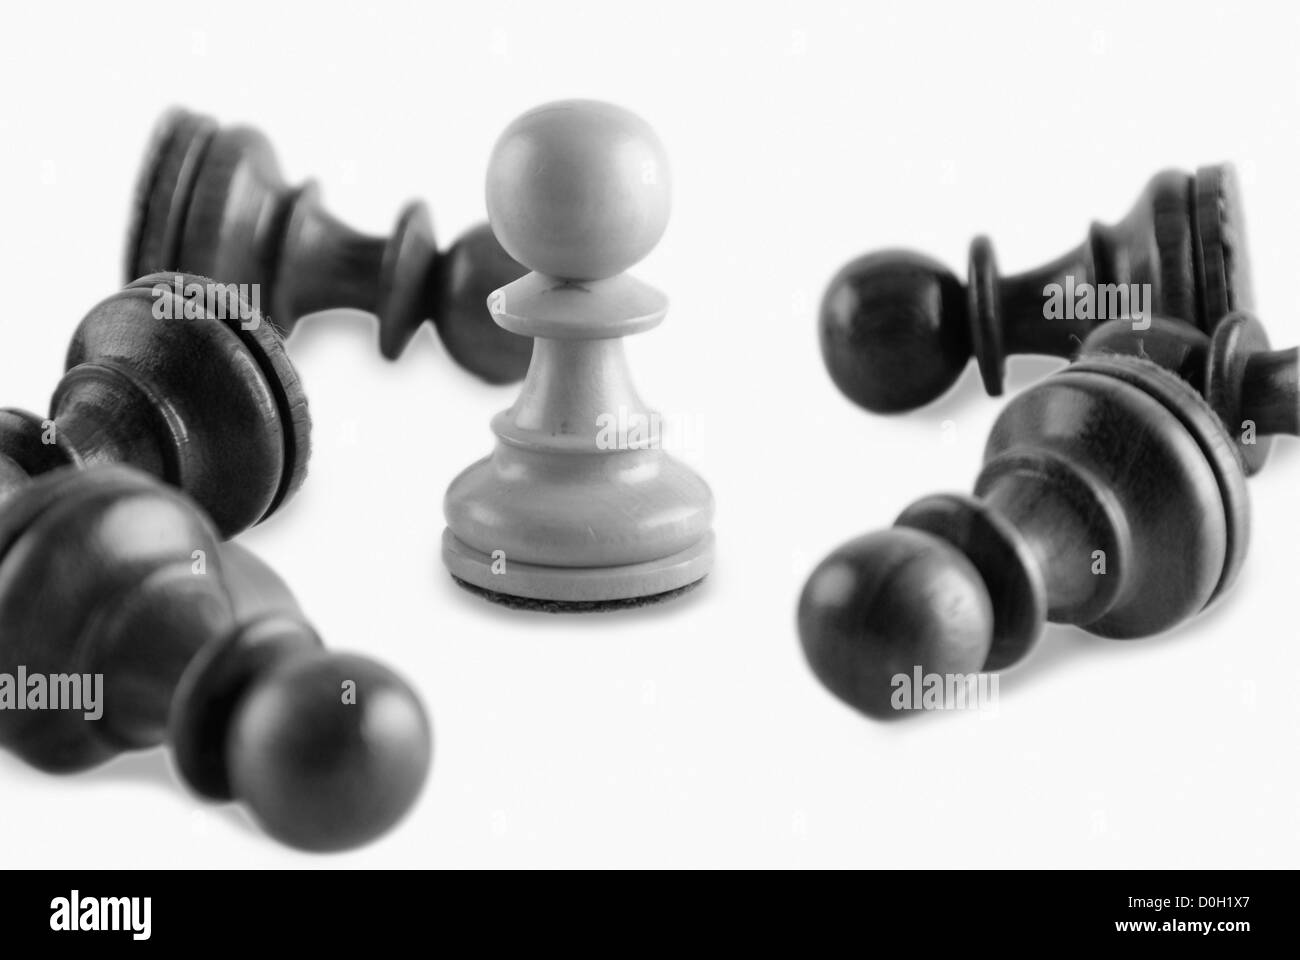 White chess pawn surrounded by black chess pawns Stock Photo